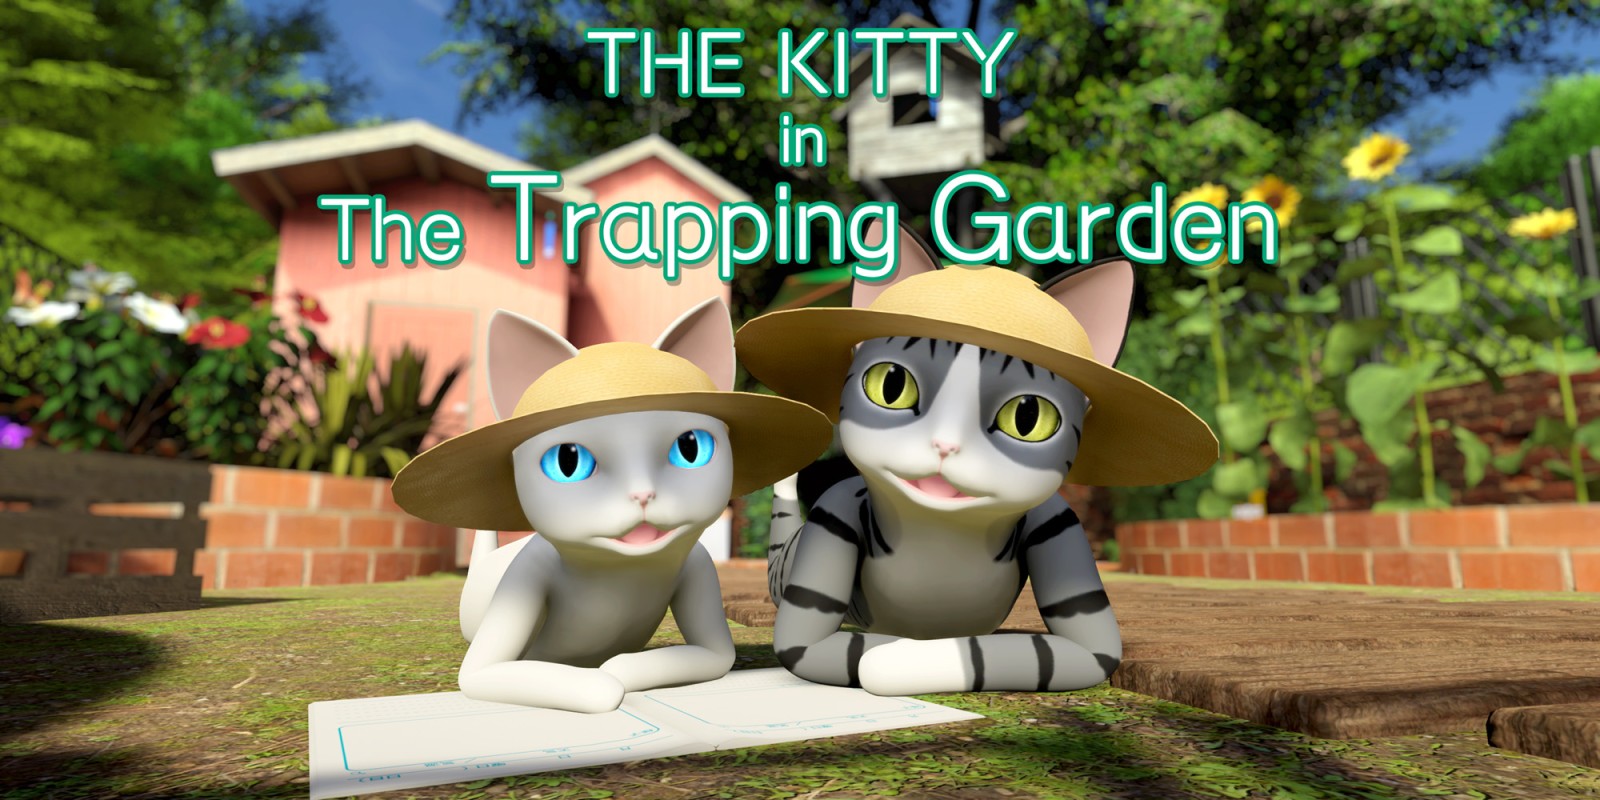 THE KITTY in The Trapping Garden